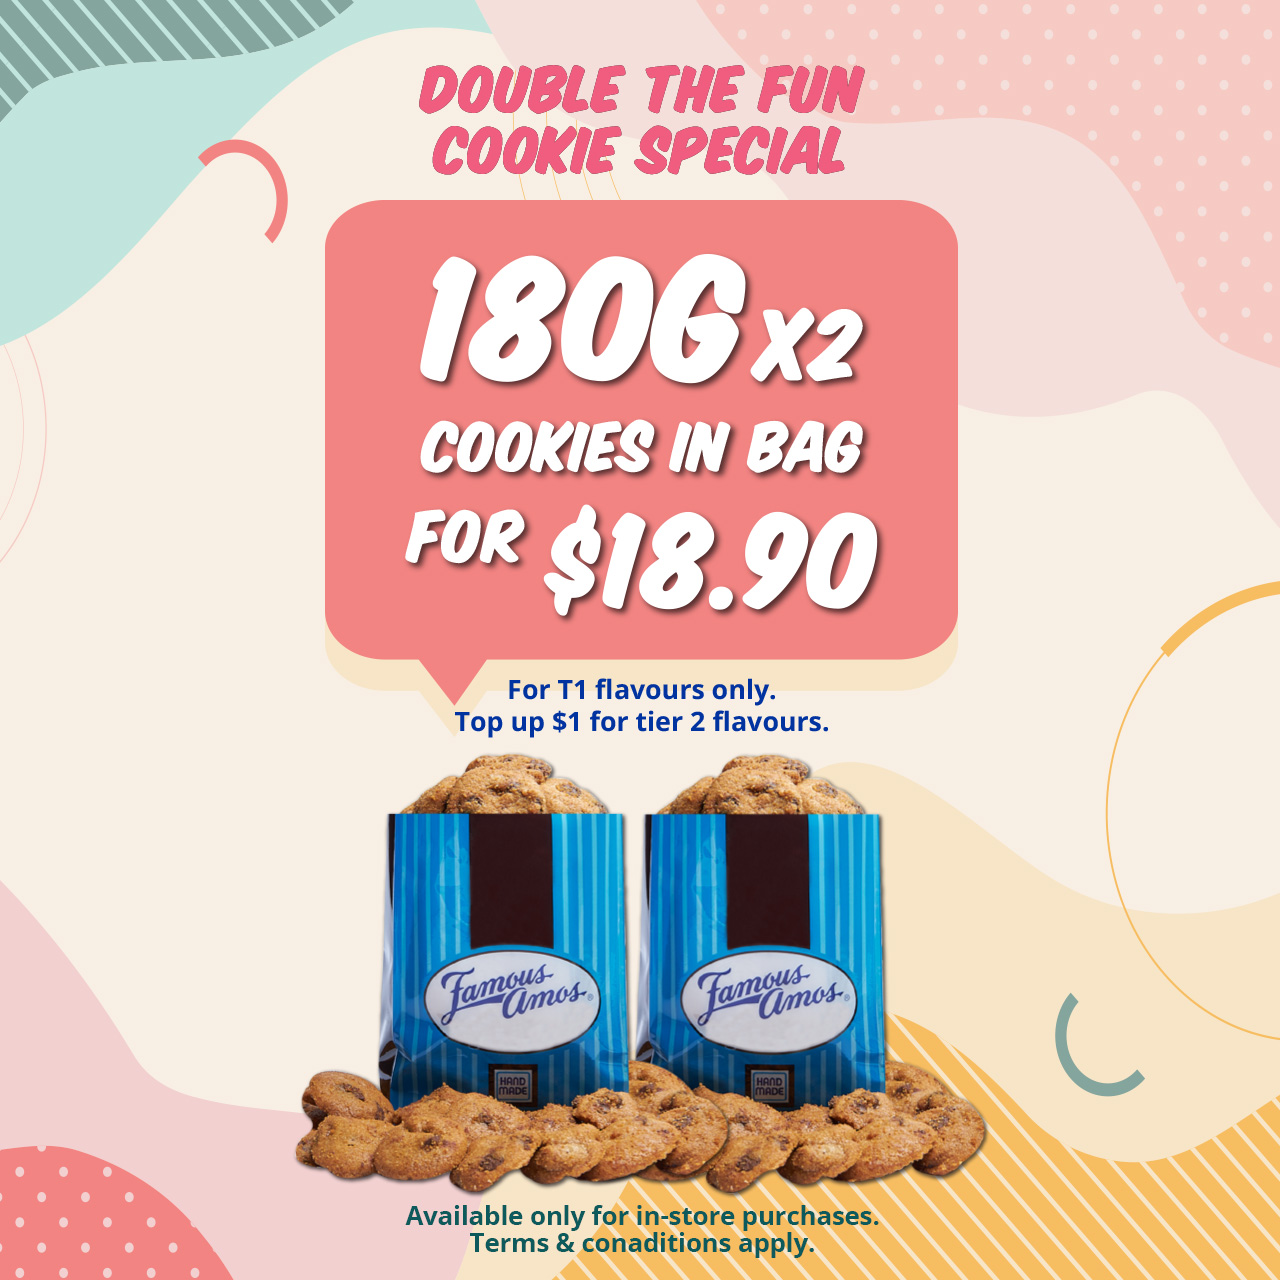 famous amos offer